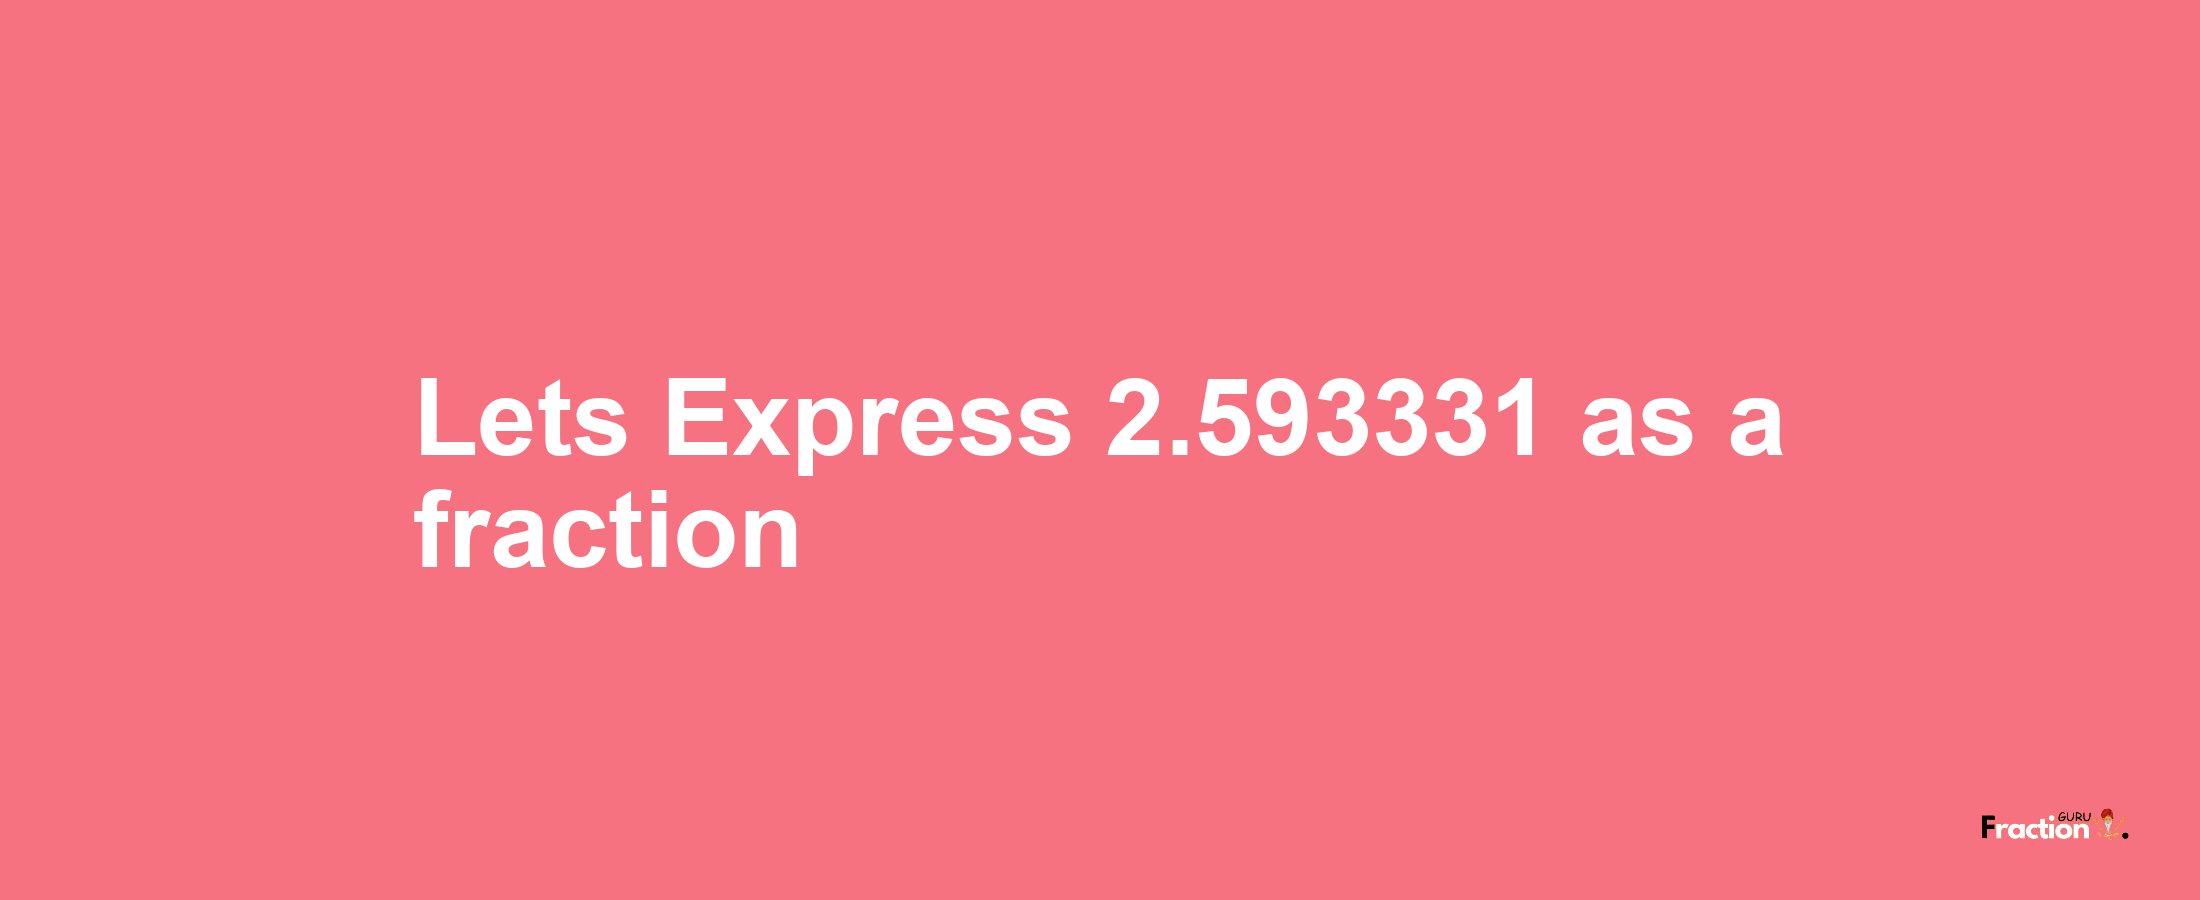 Lets Express 2.593331 as afraction